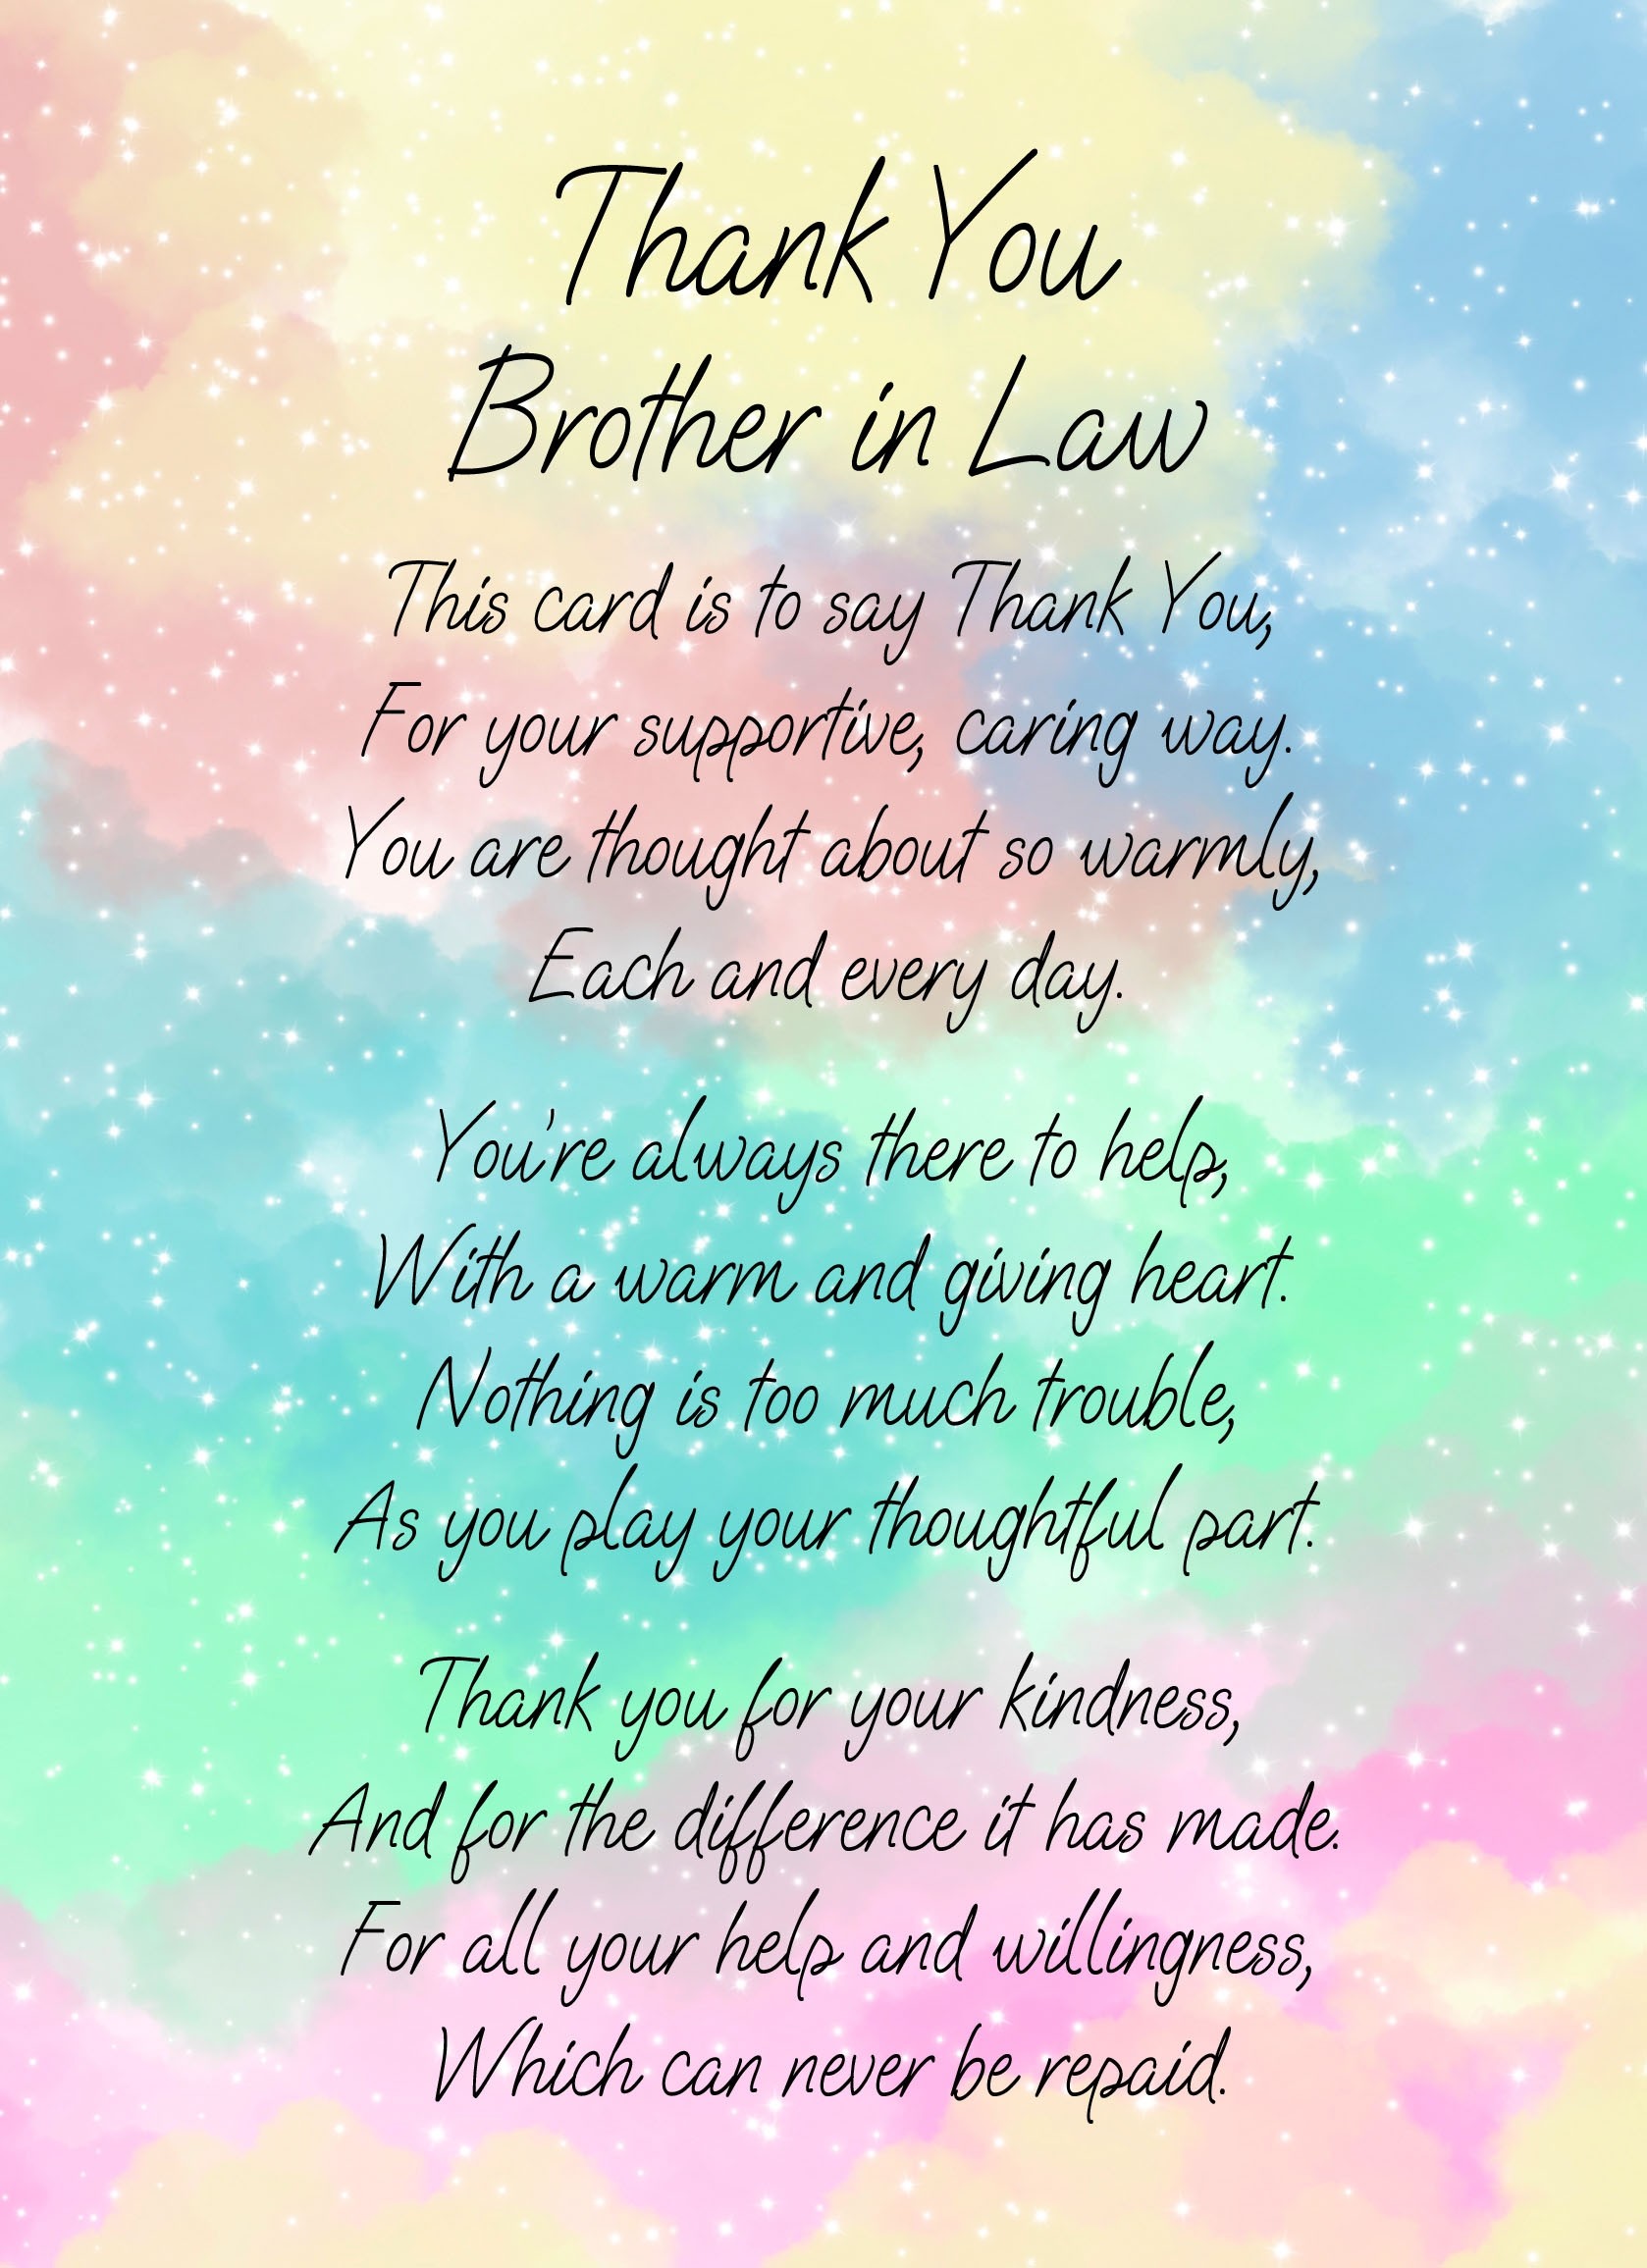 Thank You Poem Verse Card For Brother in Law